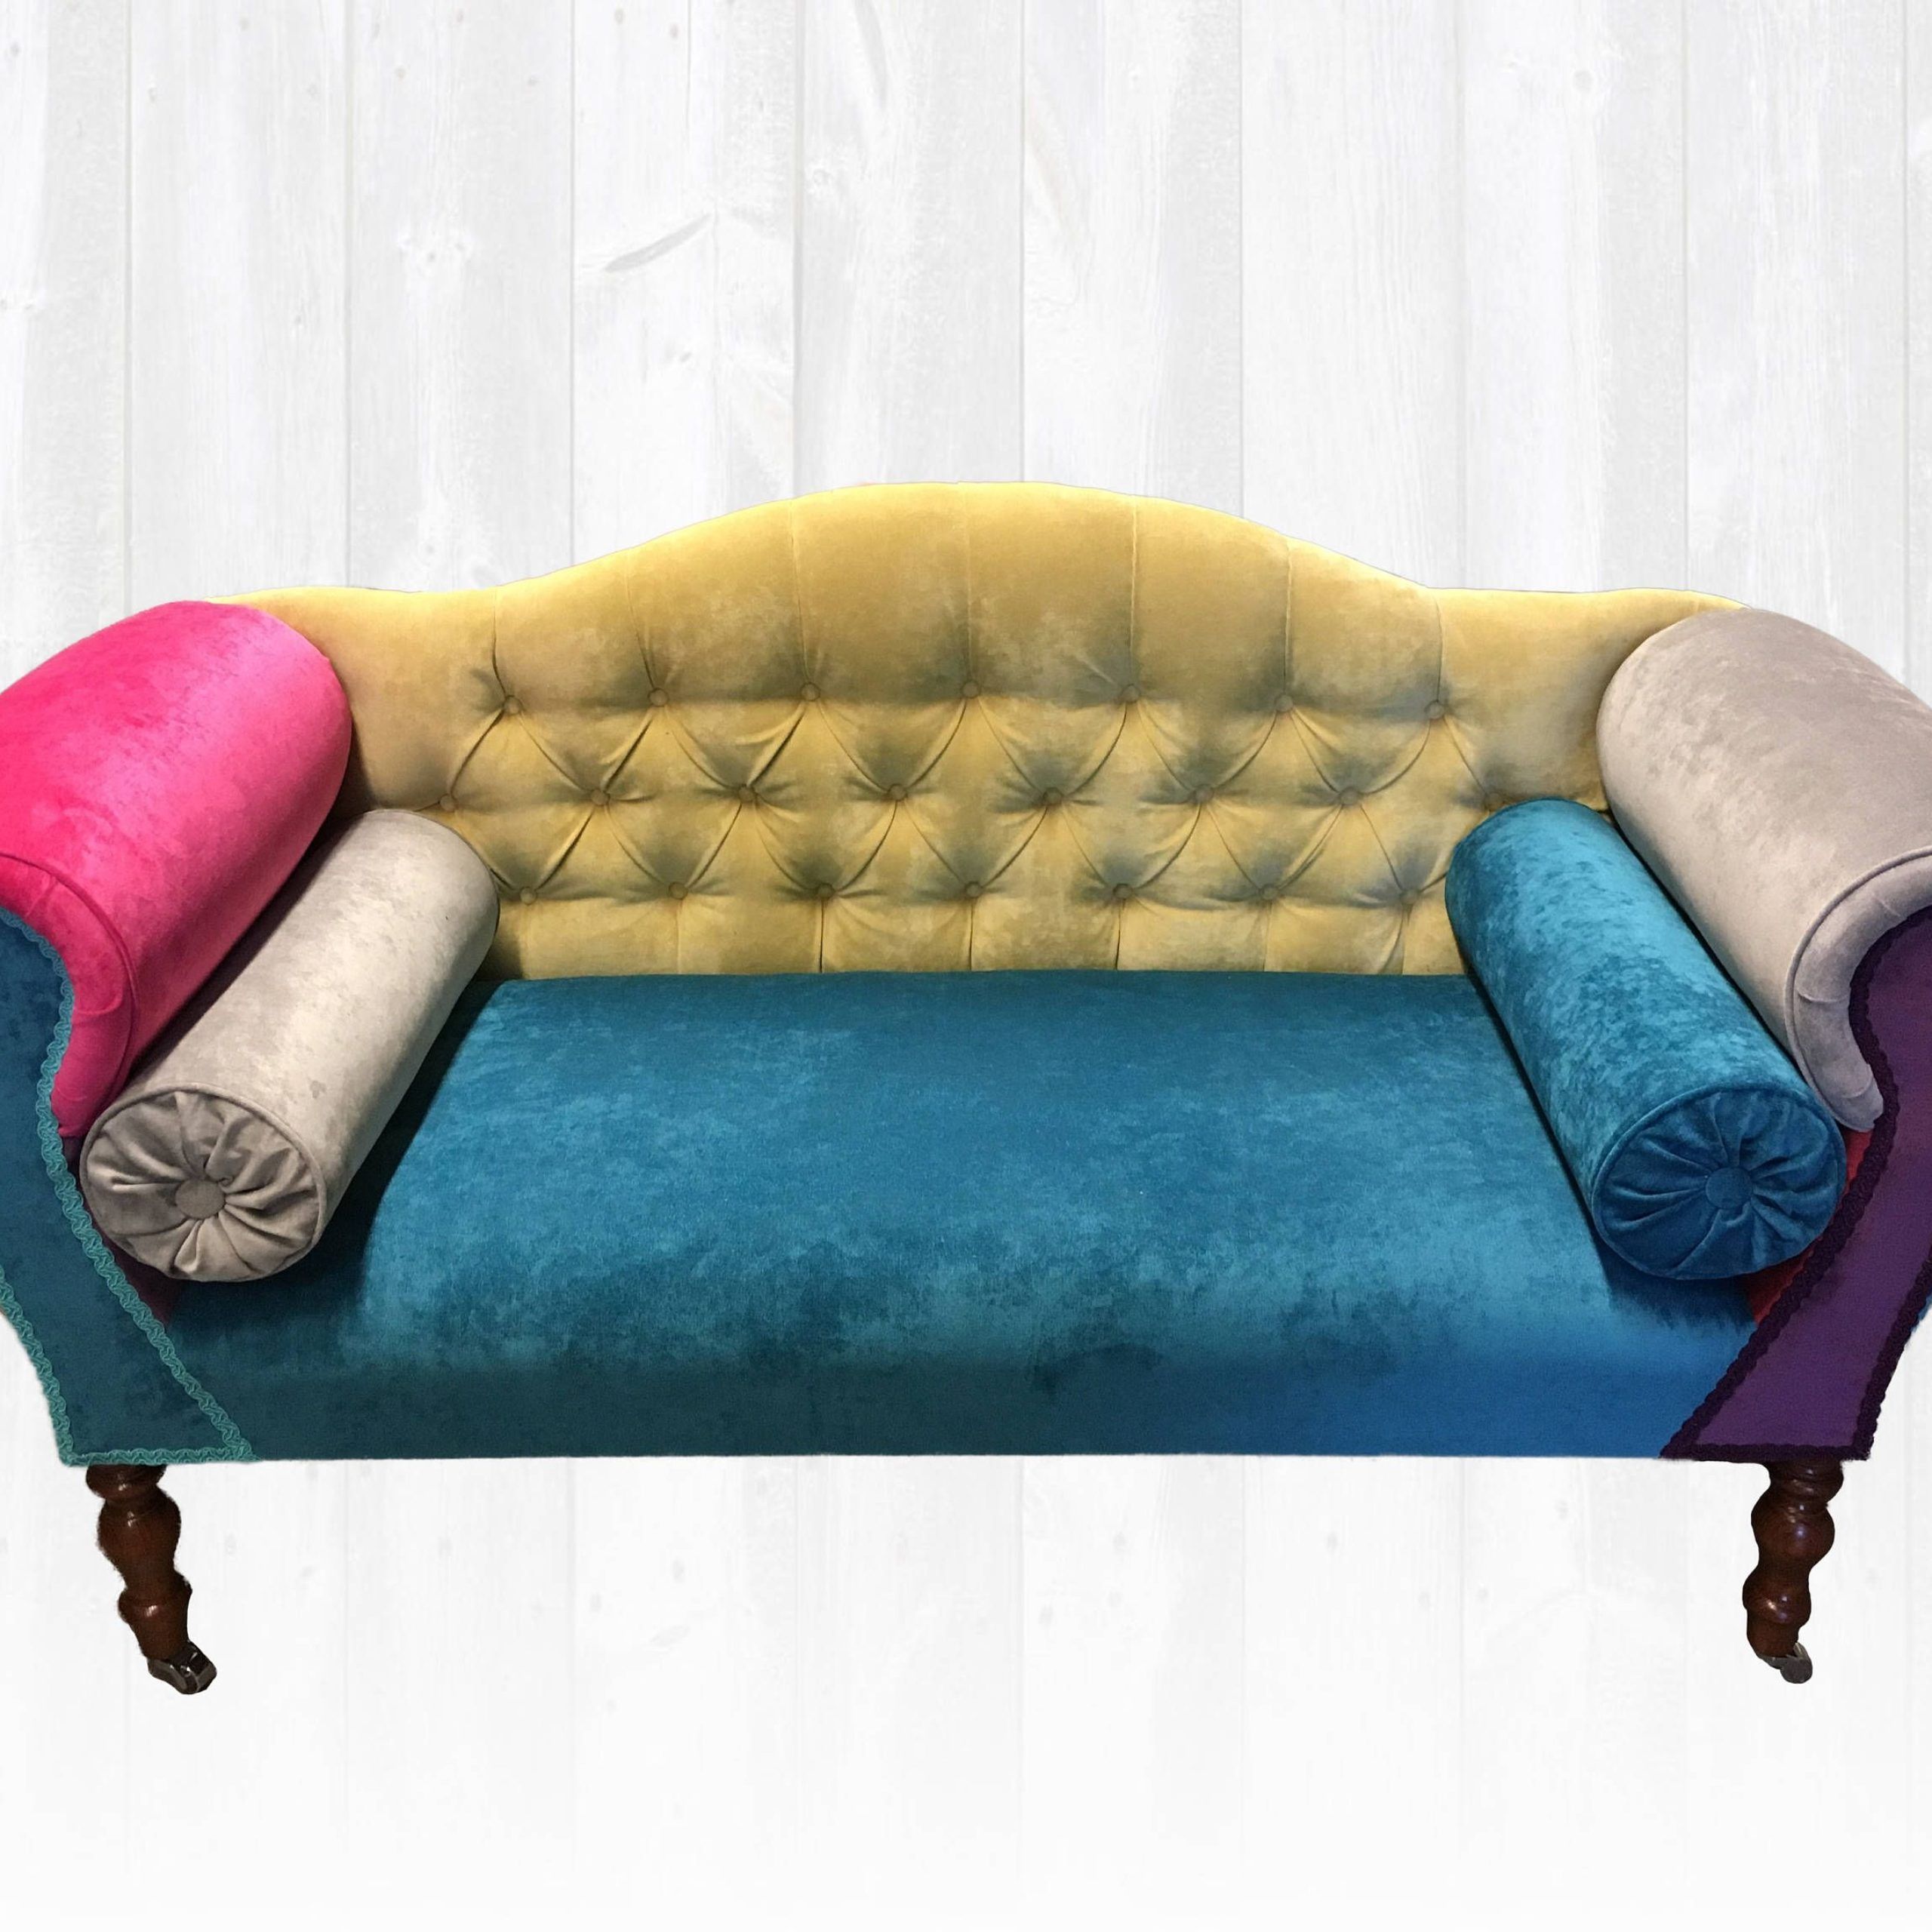 Sofas In Multiple Colors Within Well Known 7 Photos Multi Coloured Sofa Uk And Description – Alqu Blog (View 7 of 15)